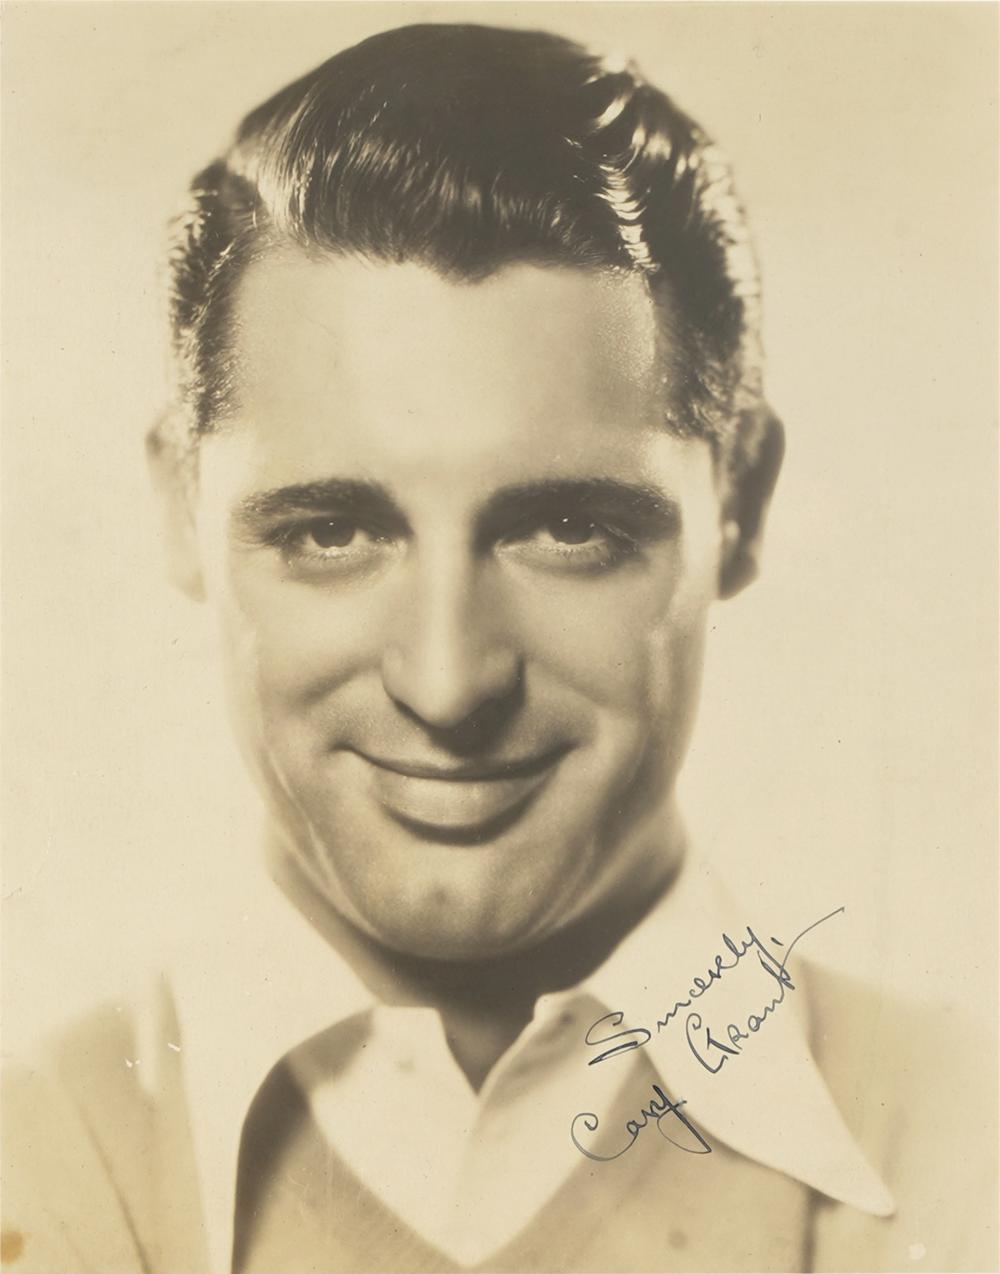 PHOTO OF CARY GRANTmatted and framed